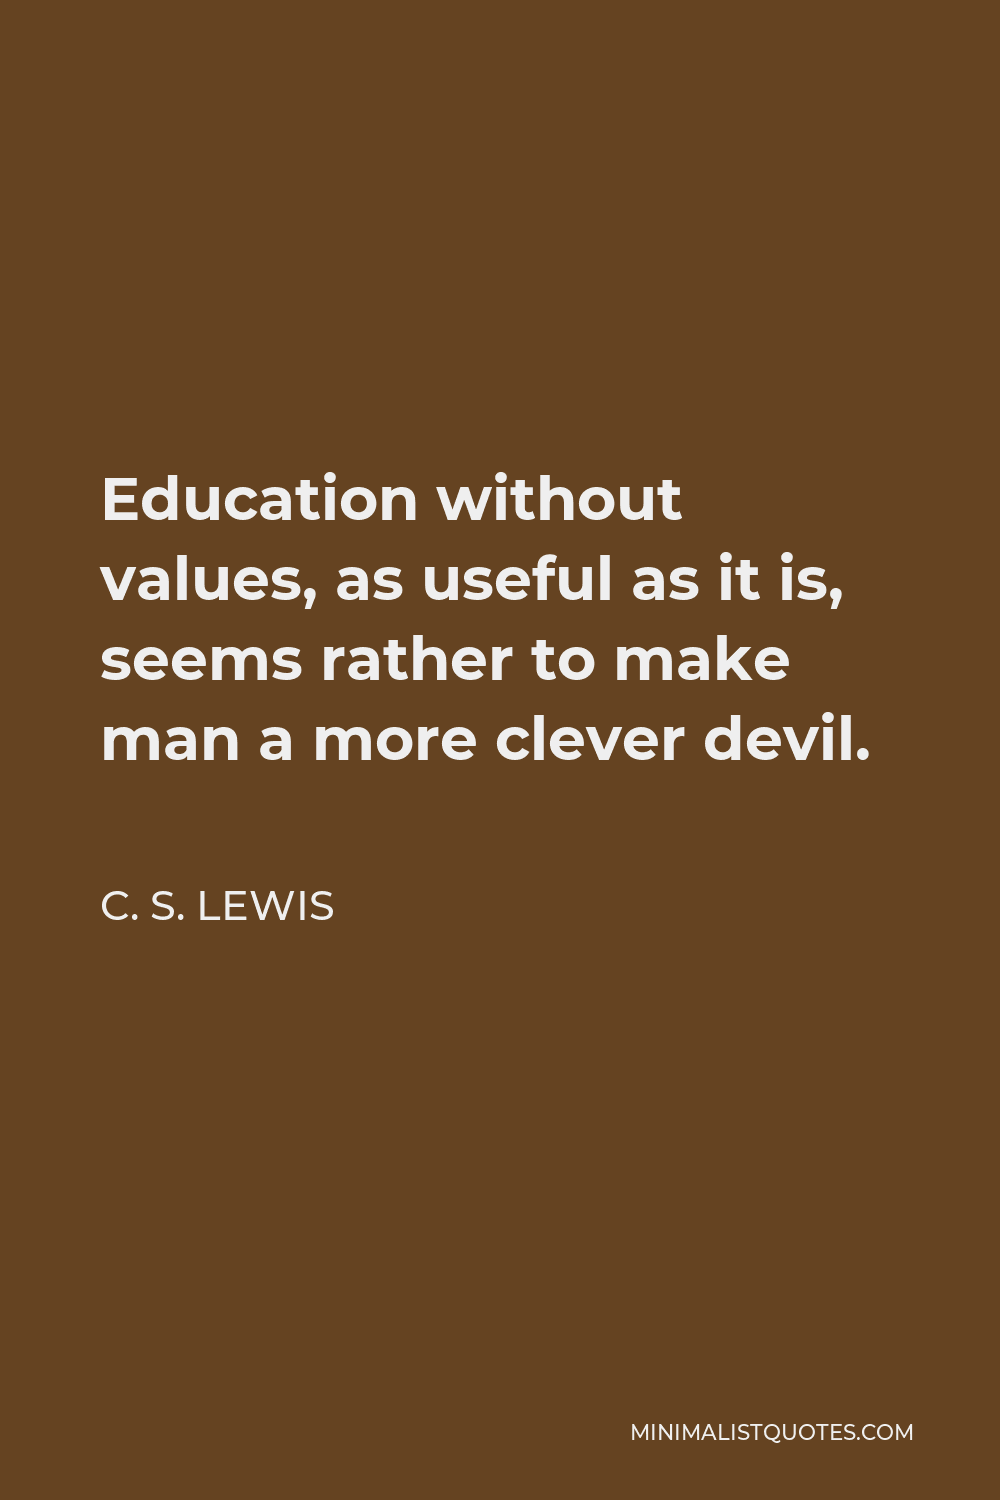 C. S. Lewis Quote - Education without values, as useful as it is, seems rather to make man a more clever devil.